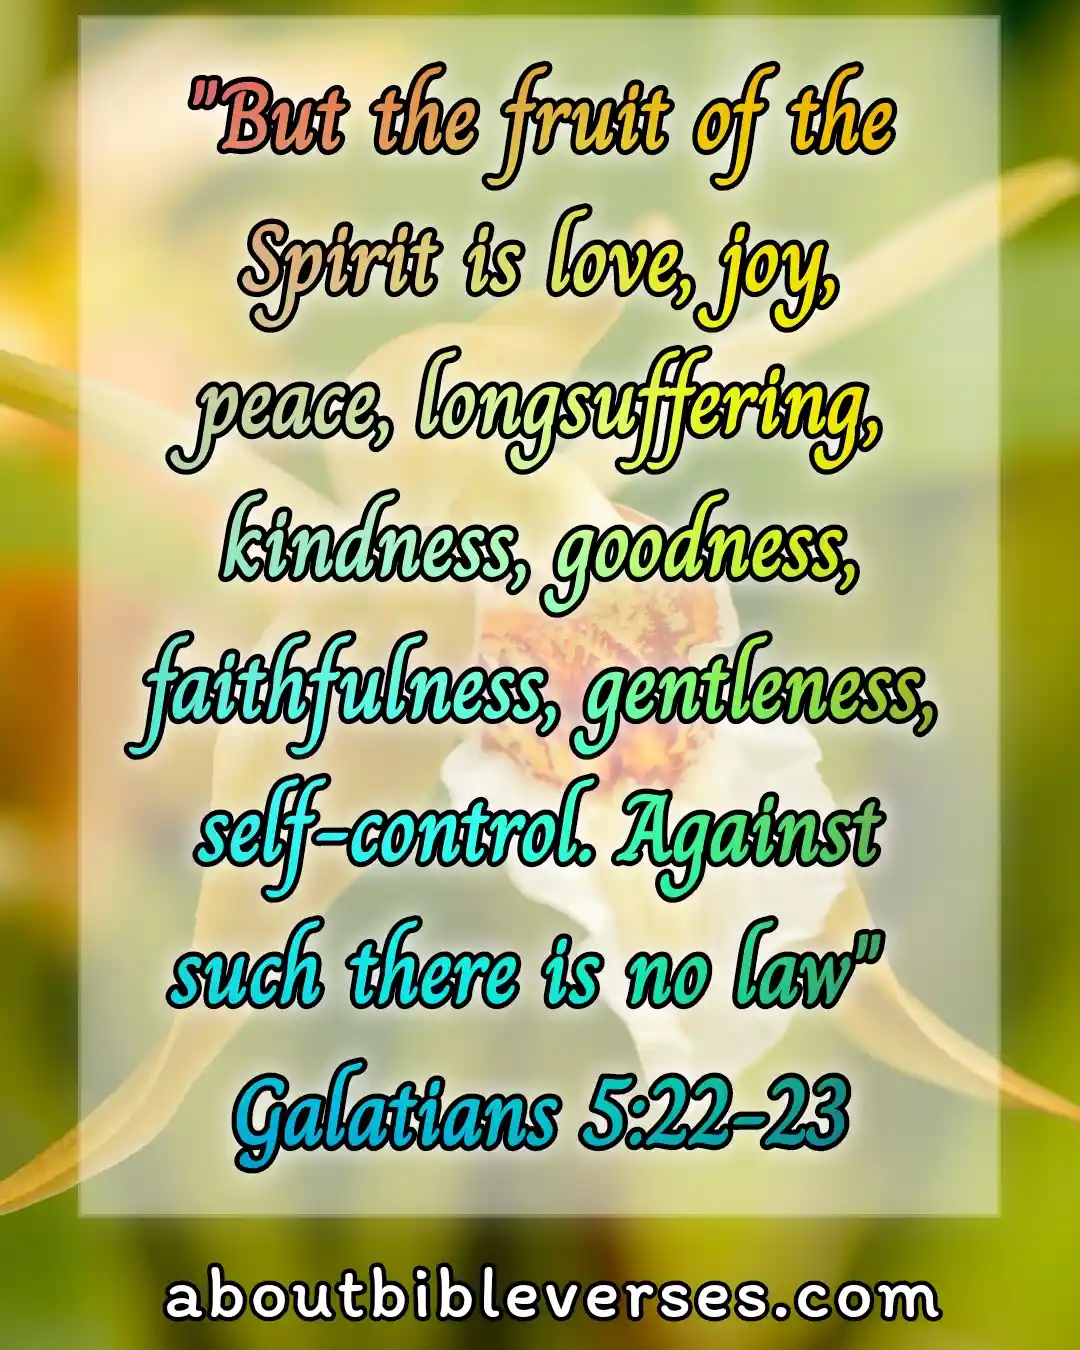 Happy Friday Blessings With Bible Verses (Galatians 5:22-23)